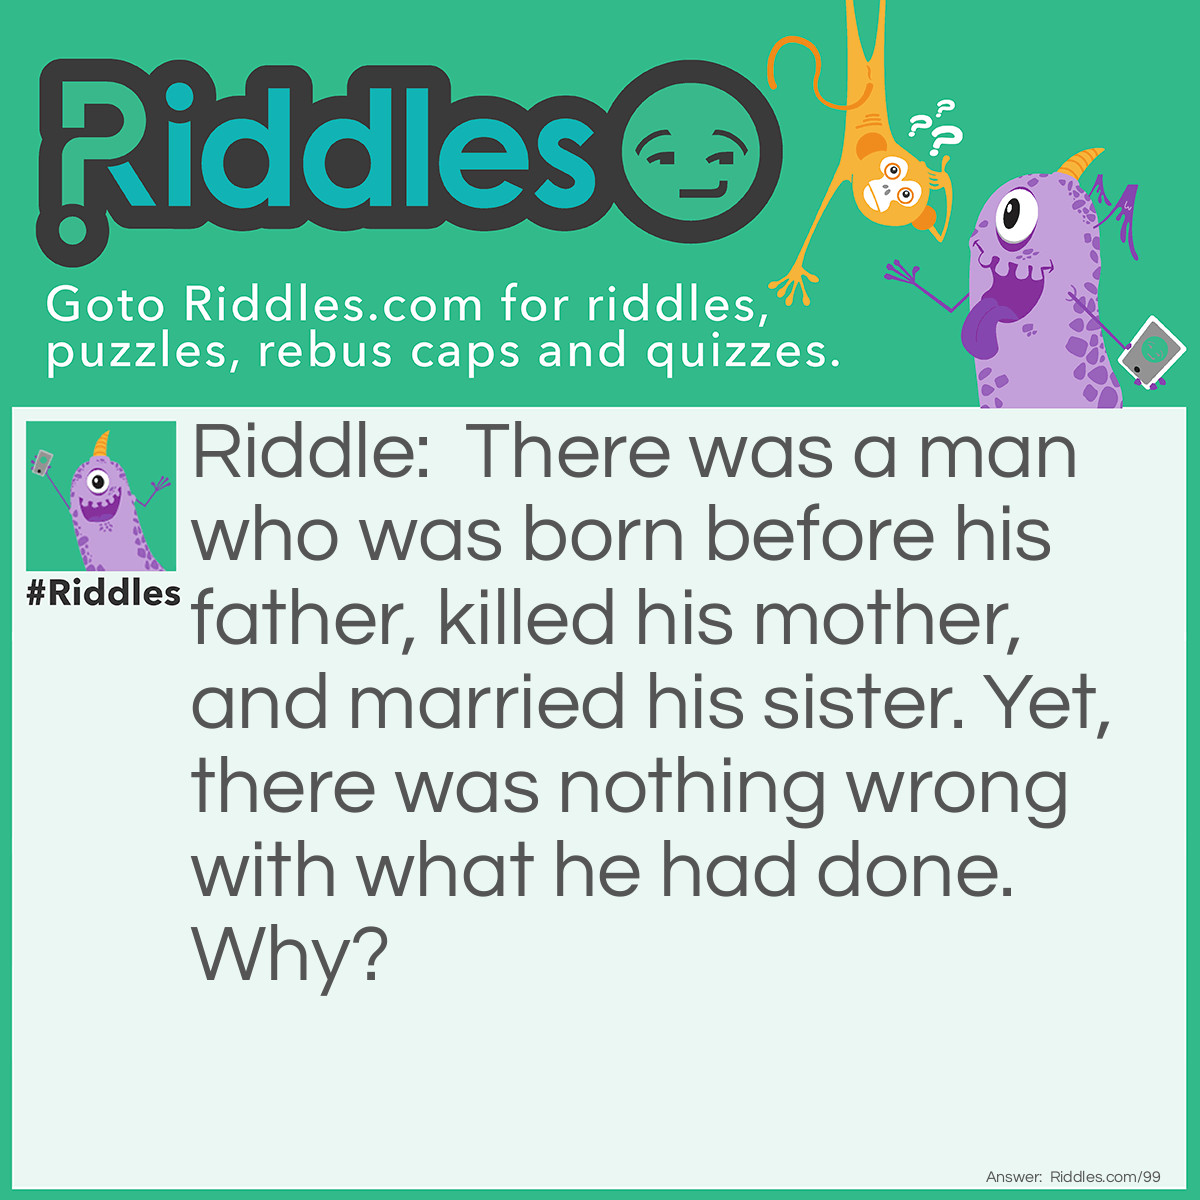 Riddle: There was a man who was born before his father, killed his mother, and married his sister. Yet, there was nothing wrong with what he had done. Why? Answer: His father was in front of him when he was born, therefore he was born before him. His mother died while giving birth to him. Finally, he grew up to be a minister and married his sister at her ceremony.